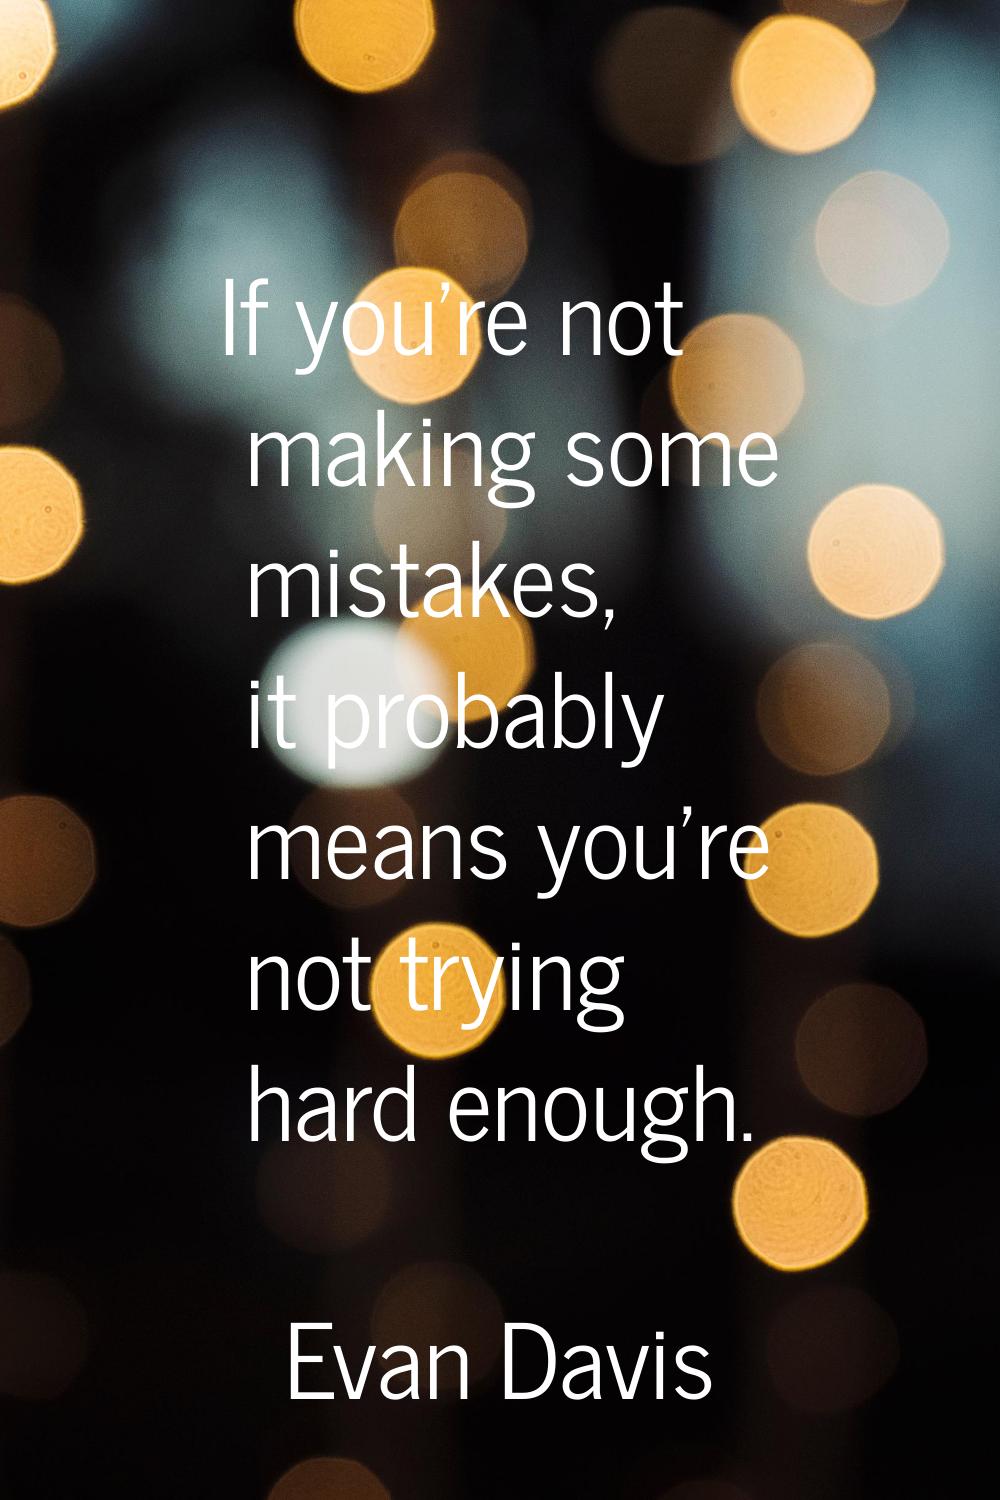 If you're not making some mistakes, it probably means you're not trying hard enough.